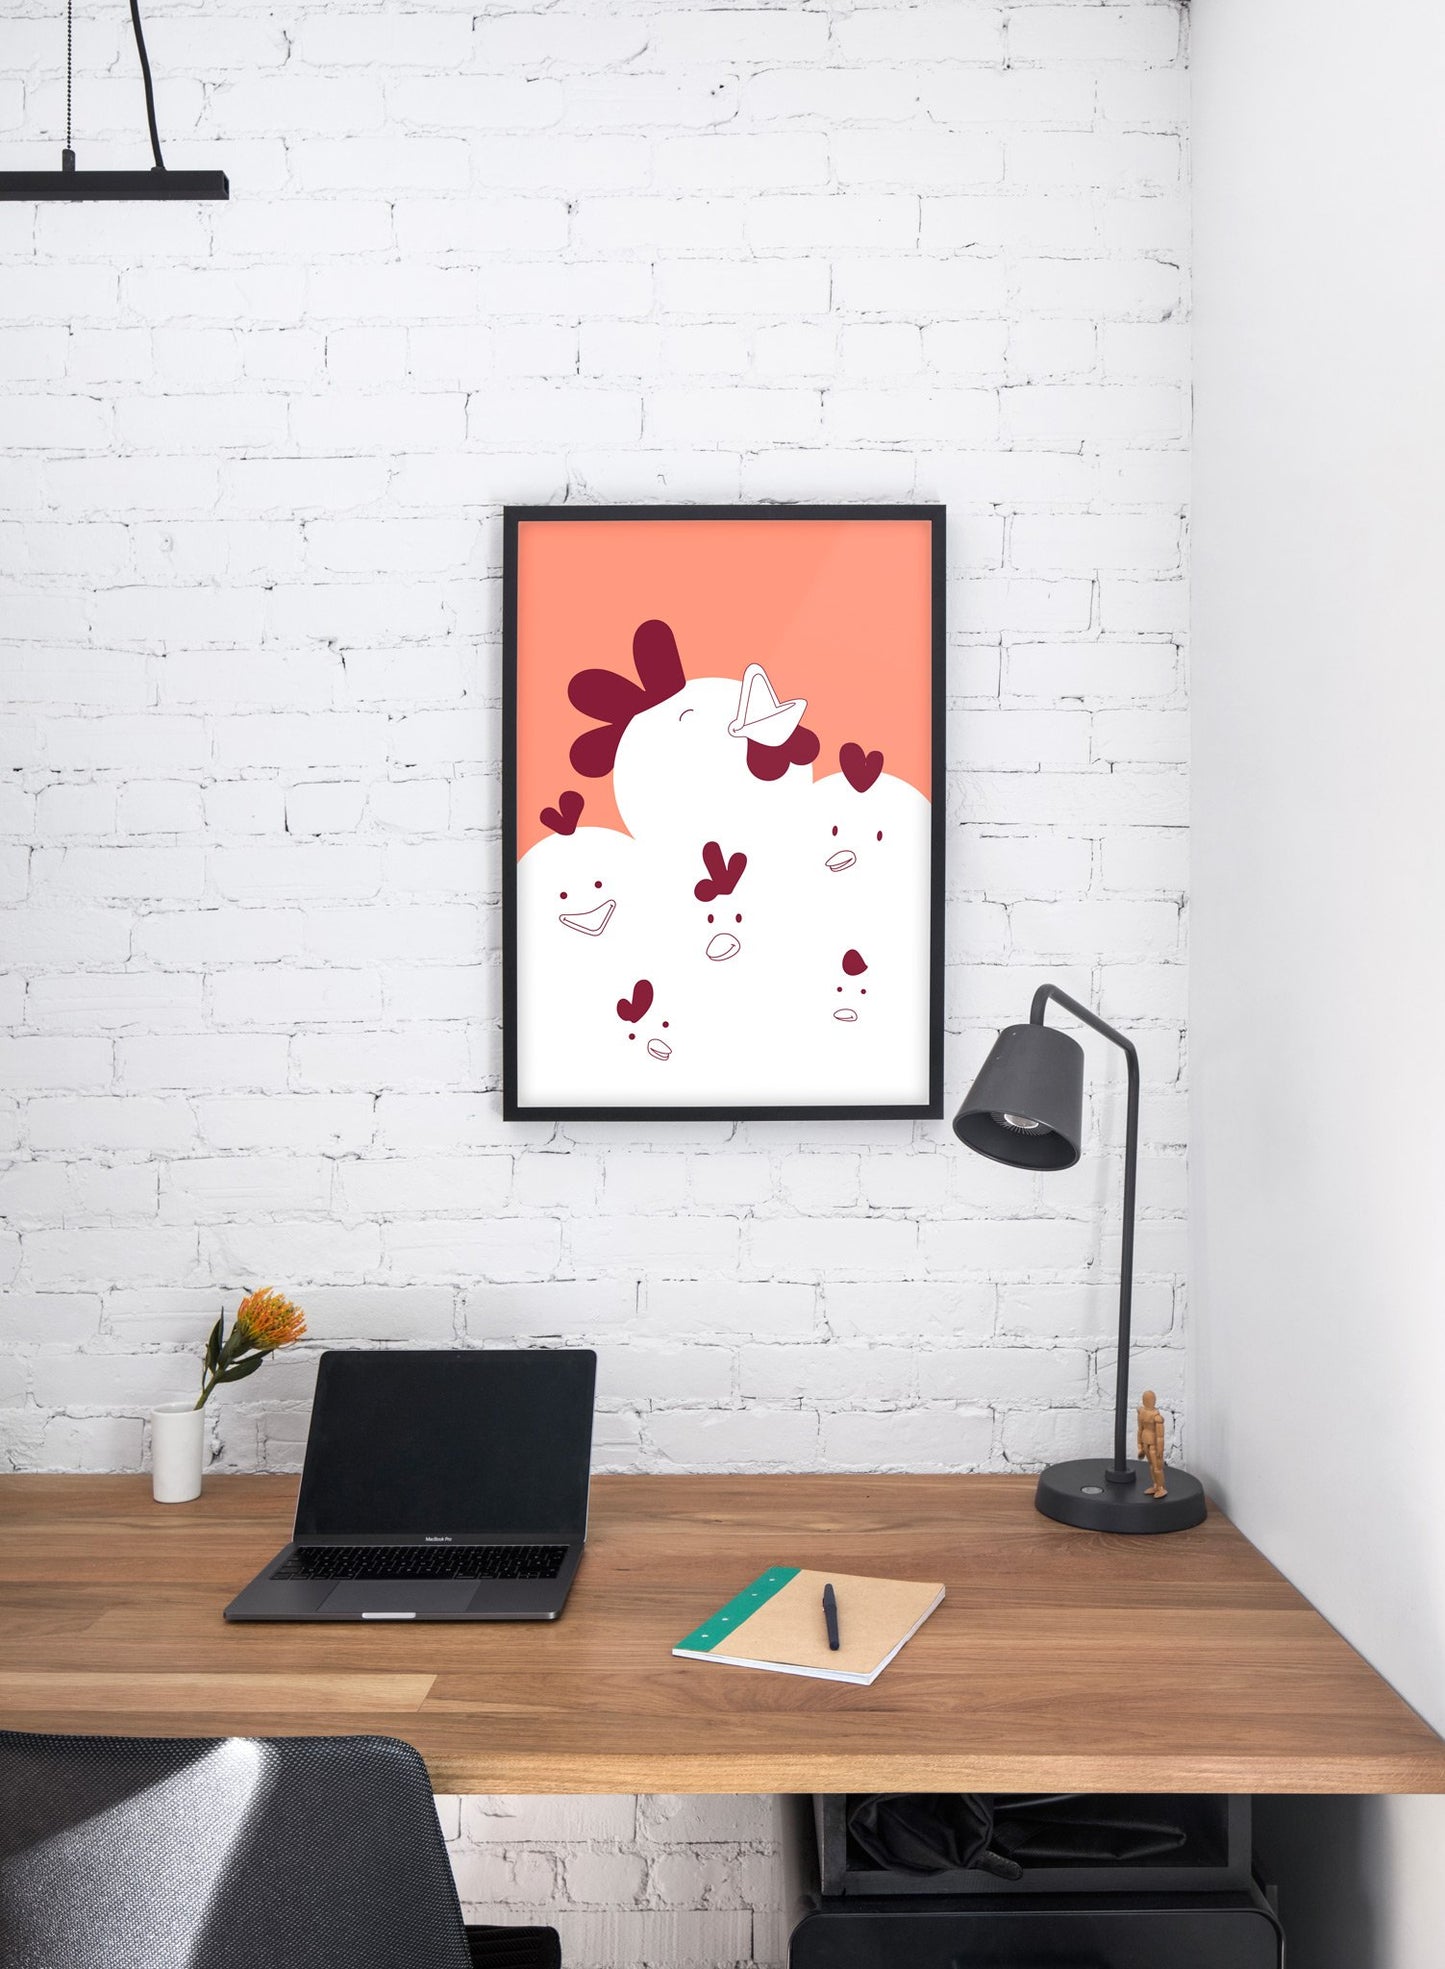 Modern minimalist poster by Opposite Wall with chicken illustration  - kids collection - personal office